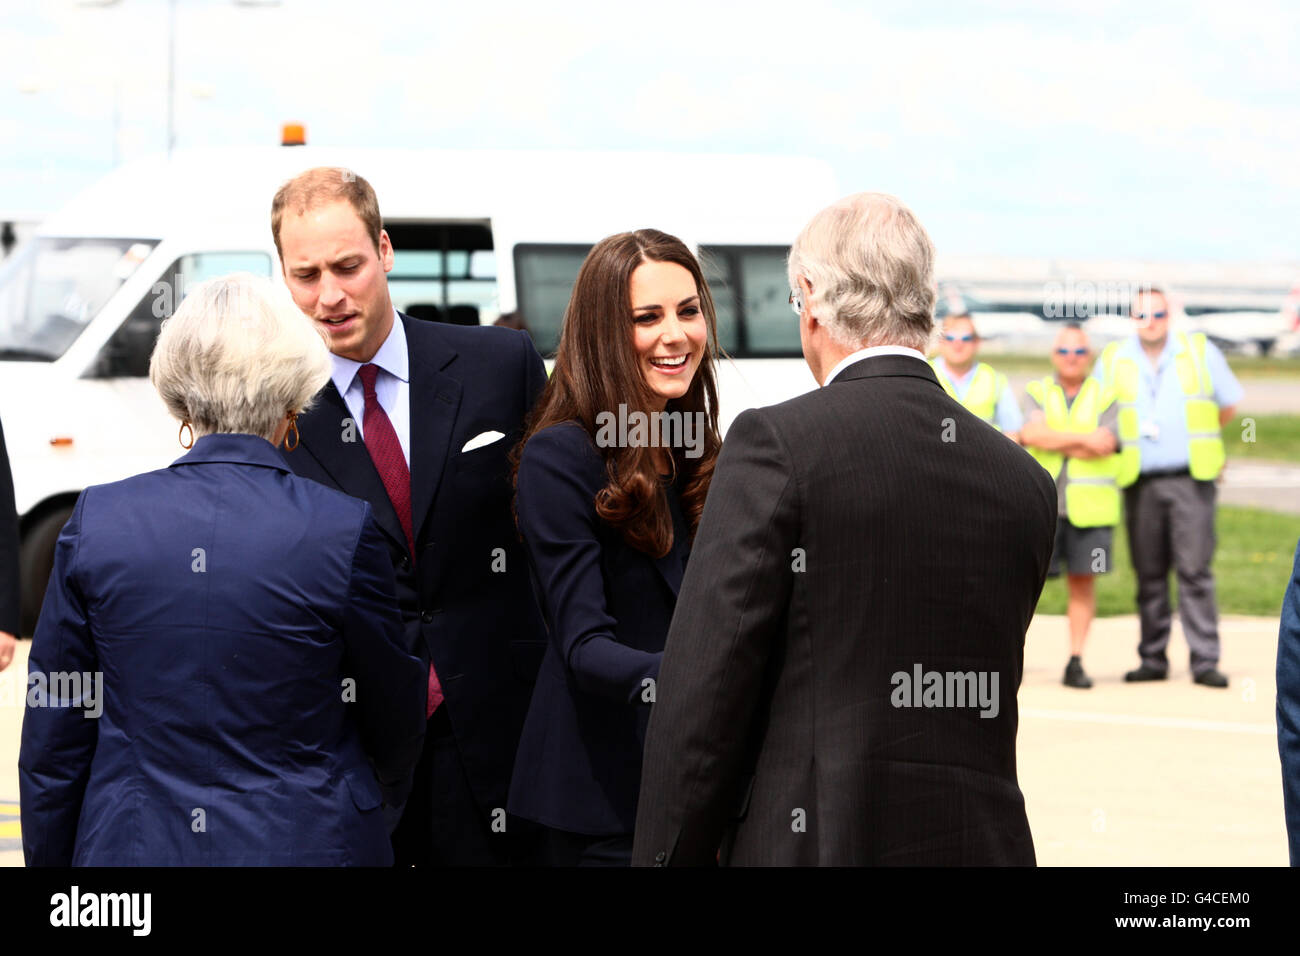 The Duke and Duchess of Cambridge talk to James Wright, the Canadian High Commissioner to the United Kingdom before they board a plane of the Royal Canadian Air Force at London's Heathrow Airport to travel to Ottawa for their first overseas tour as a married couple. Stock Photo